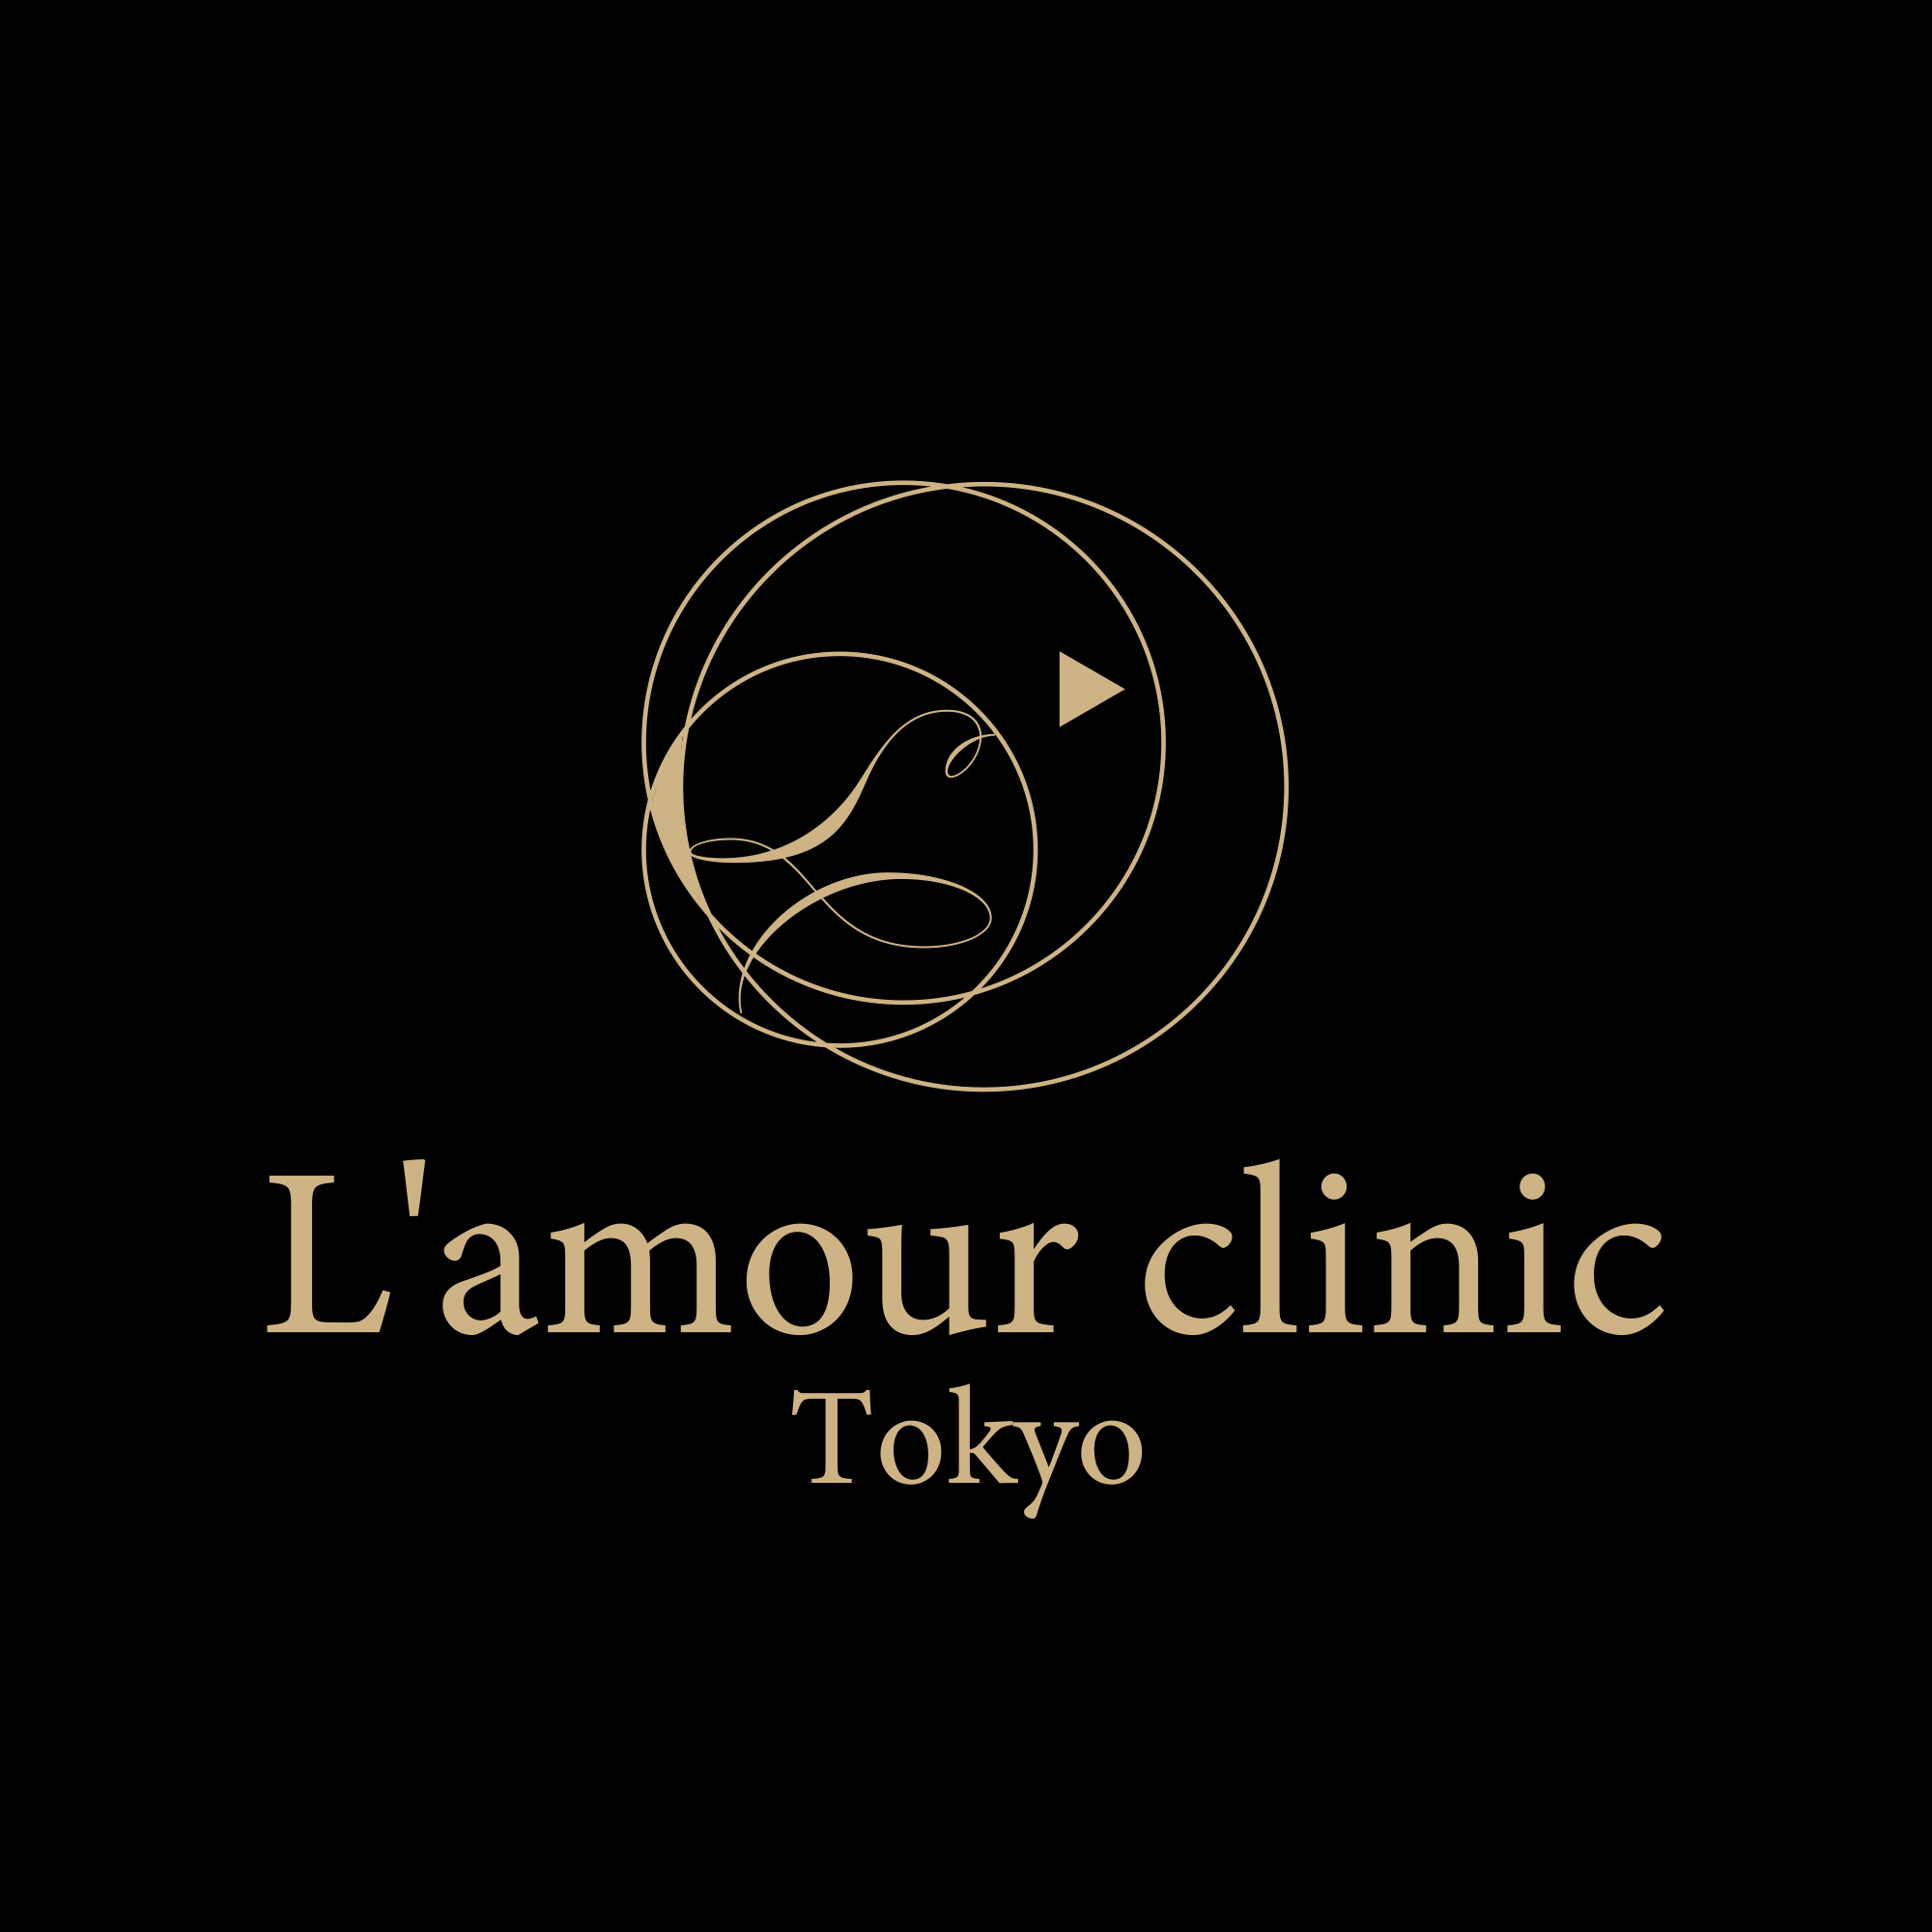 L’amour clinic Tokyo ロゴ